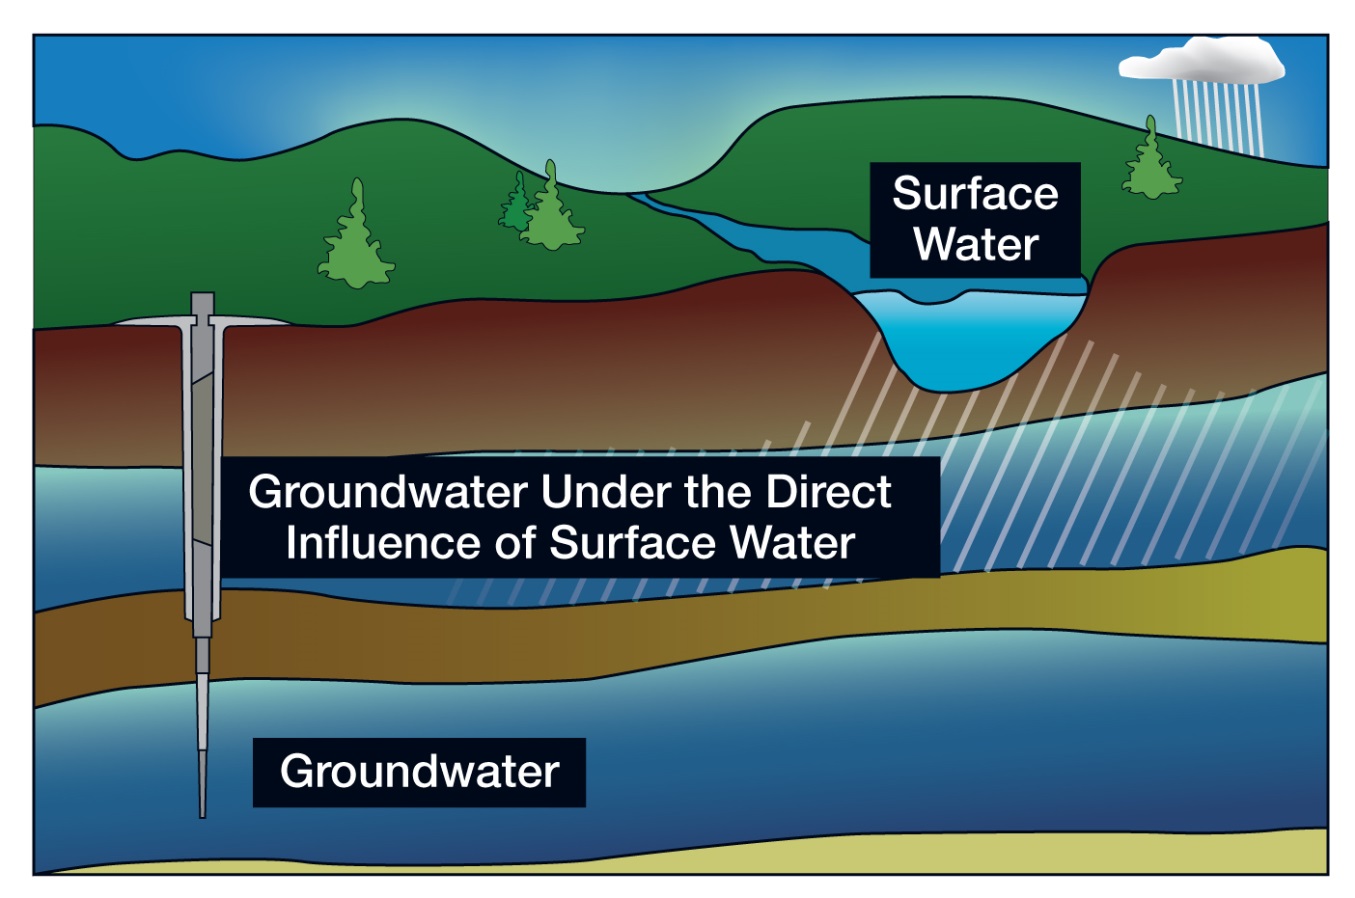 An illustration showing three different types of water sources: surface water. groundwater under the influences of surface water, and groundwater.